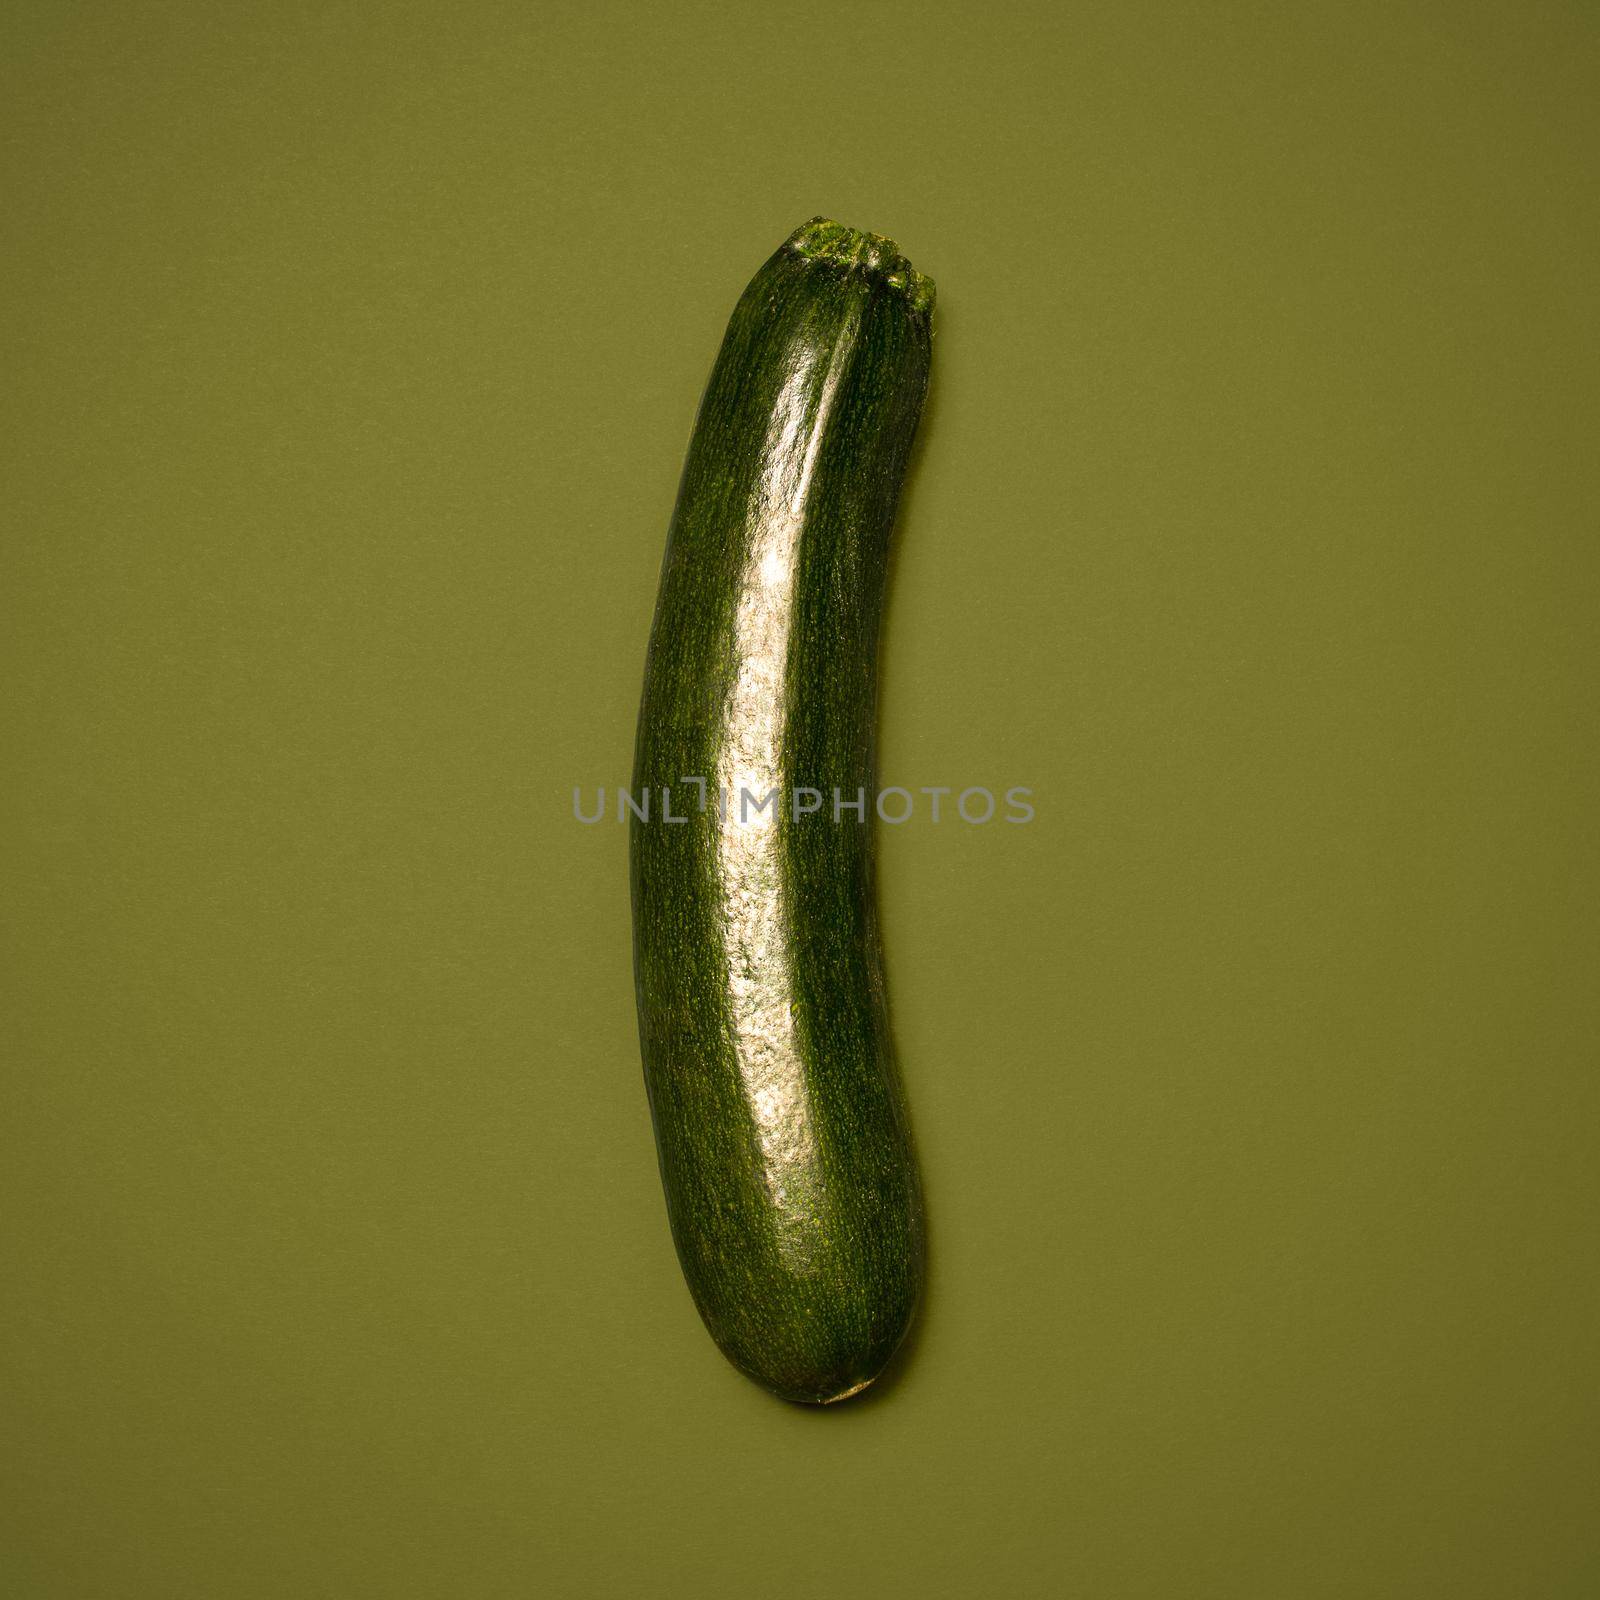 Thick green and juicy. Shot of a green marrow against a studio background. by YuriArcurs